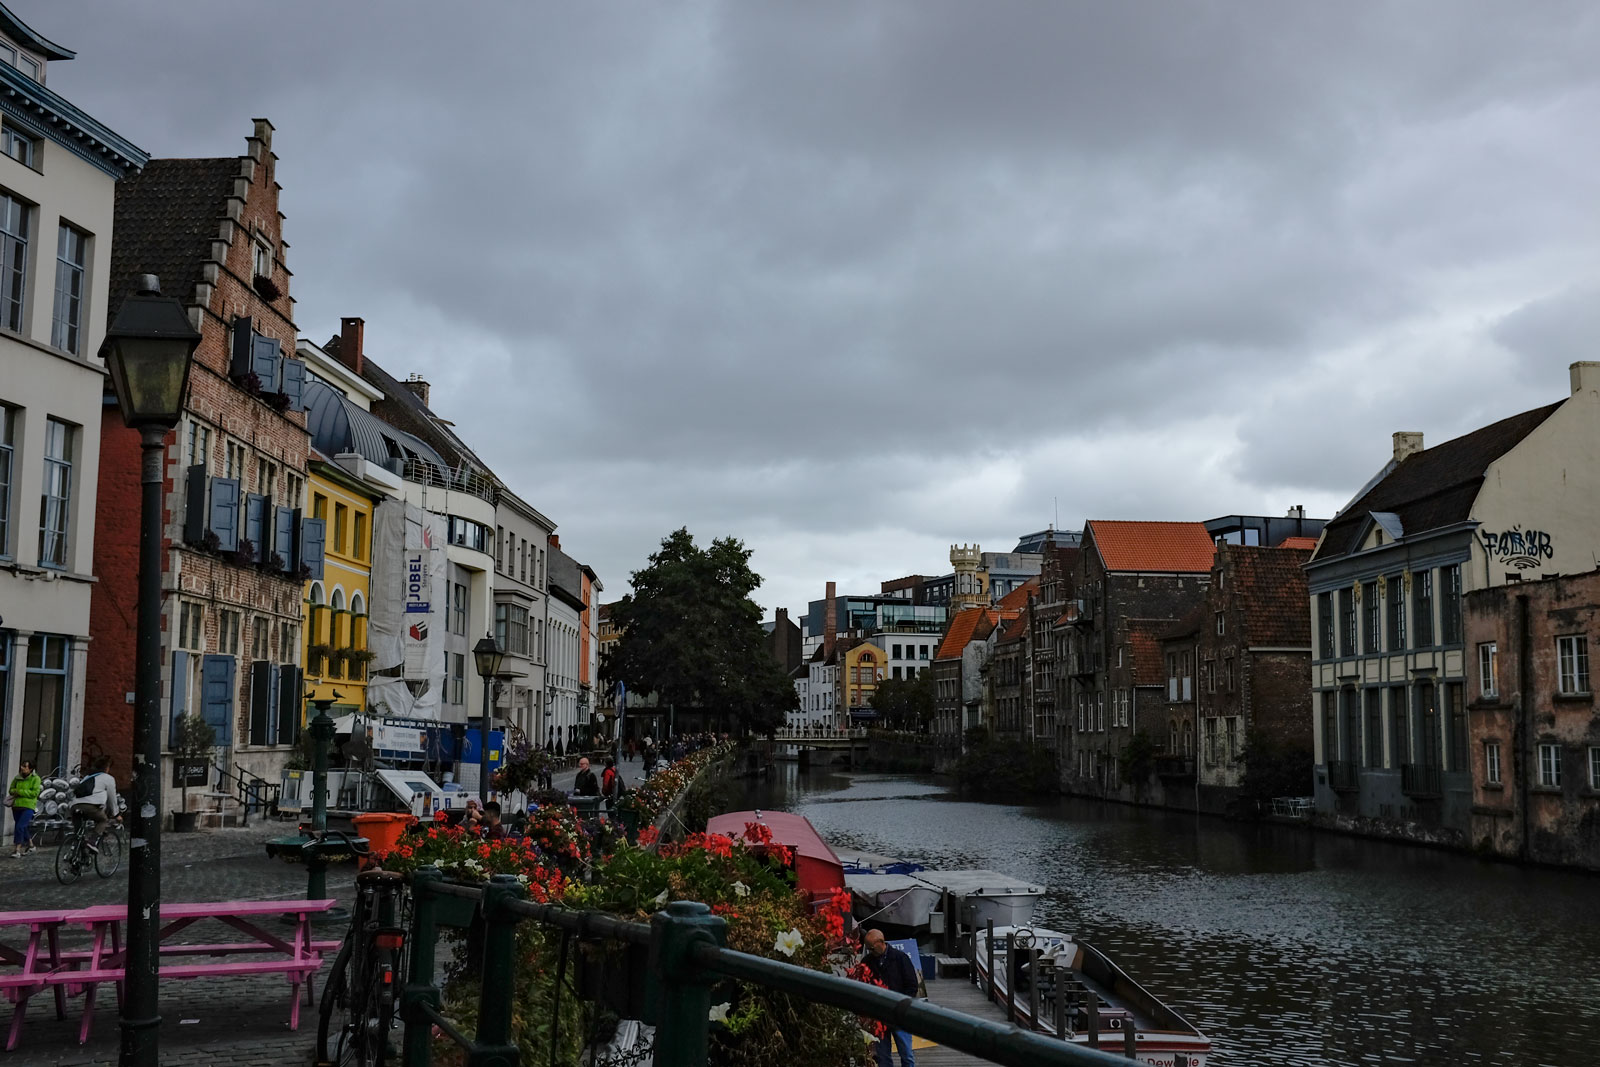 A picturesque view in Ghent